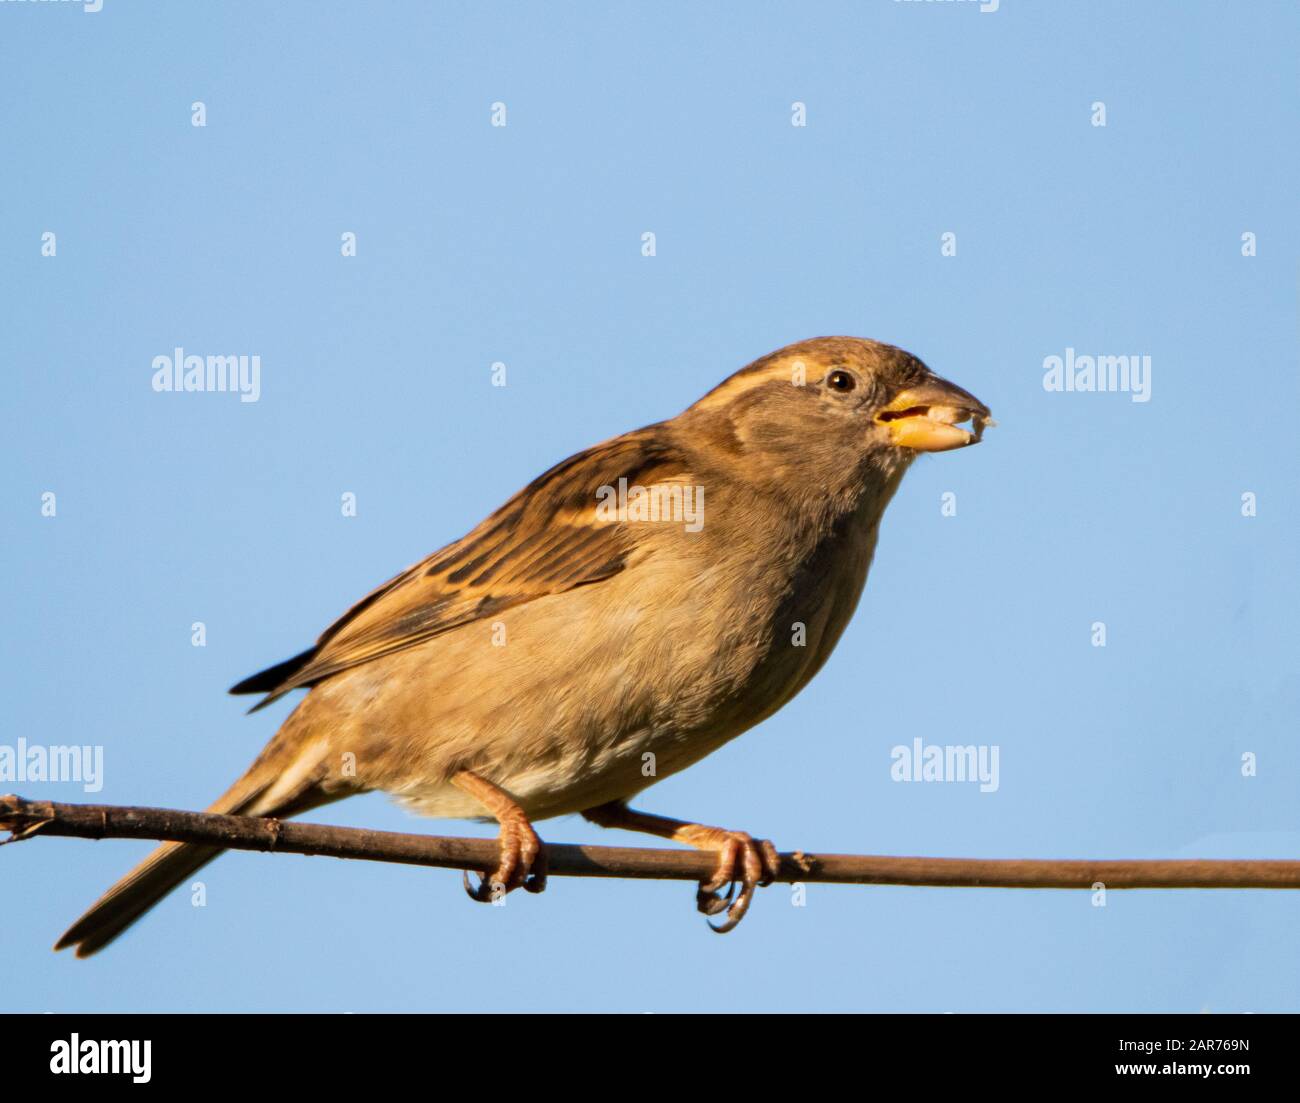 House Sparrow, Passer deomsticus, wild bird, perched on a branch in a United Kingdom garden, winter 2019-20 Stock Photo